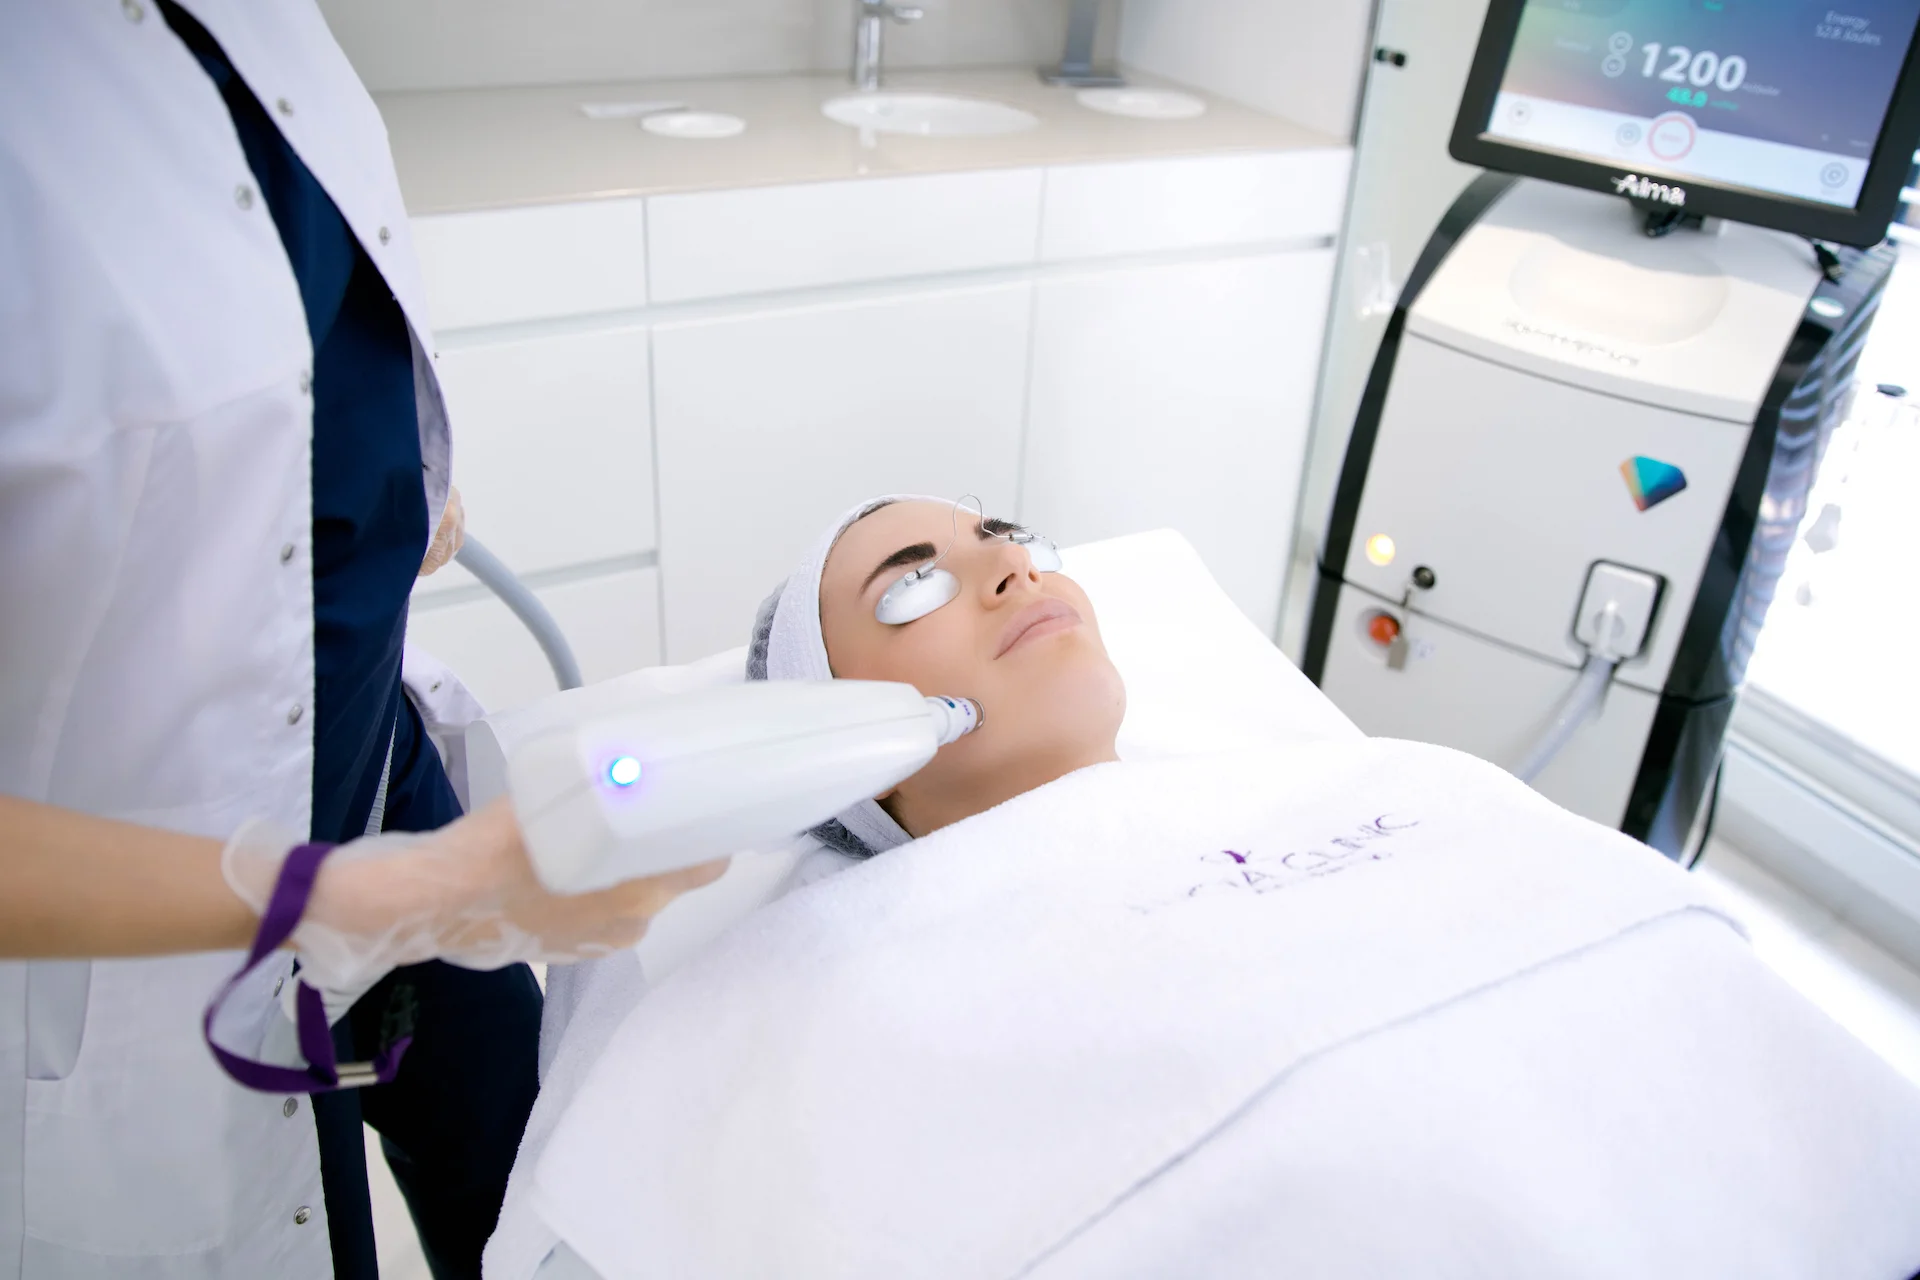 ClearLift, anti-aging facial rejuvenation laser procedure - firm the skin, reduce fine lines and wrinkles and improve pigmentation with this advanced treatment.